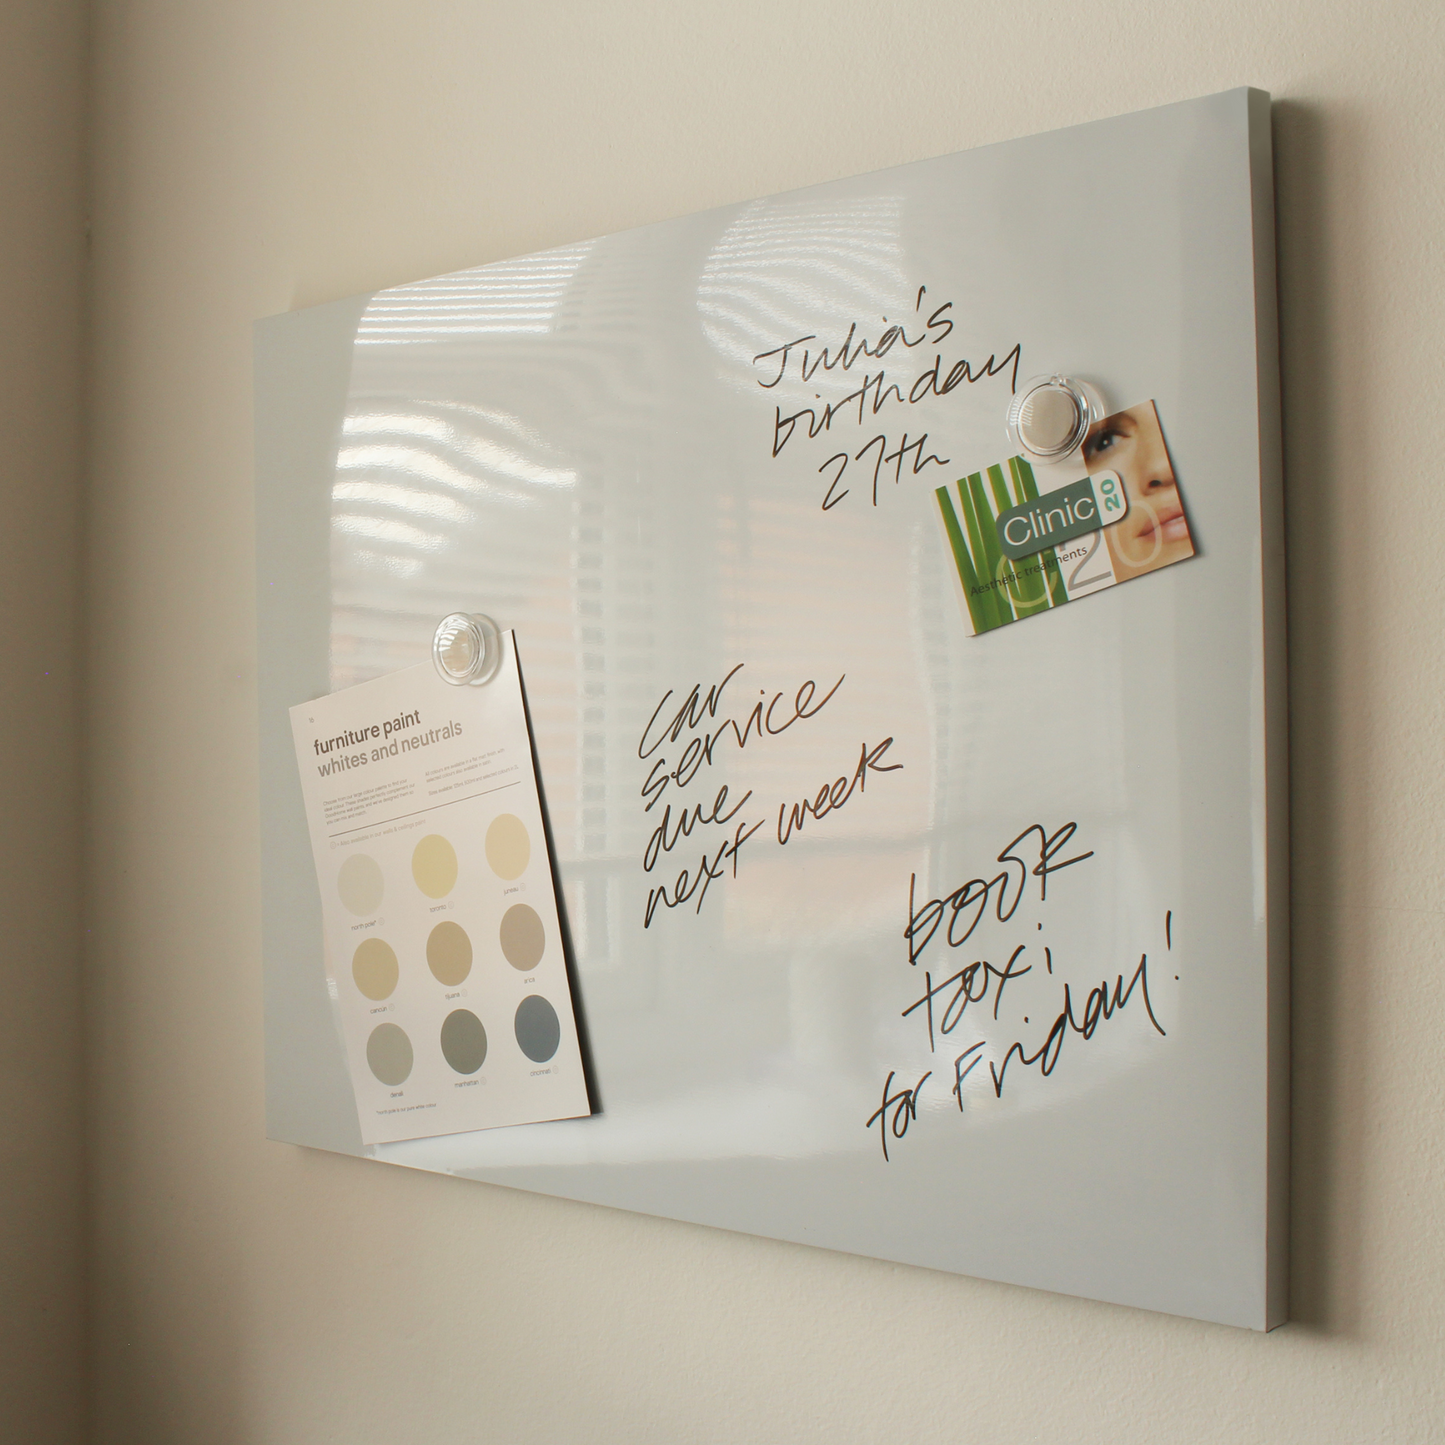 A frameless dry erase board (40 x 51 cm) mounted on a wall with handwritten notes including 'Julia's birthday 27th', 'Car service due next week', and 'Book hotel for Friday!'. Also attached to the board are a furniture paint swatch card and a promotional Clinic flyer.